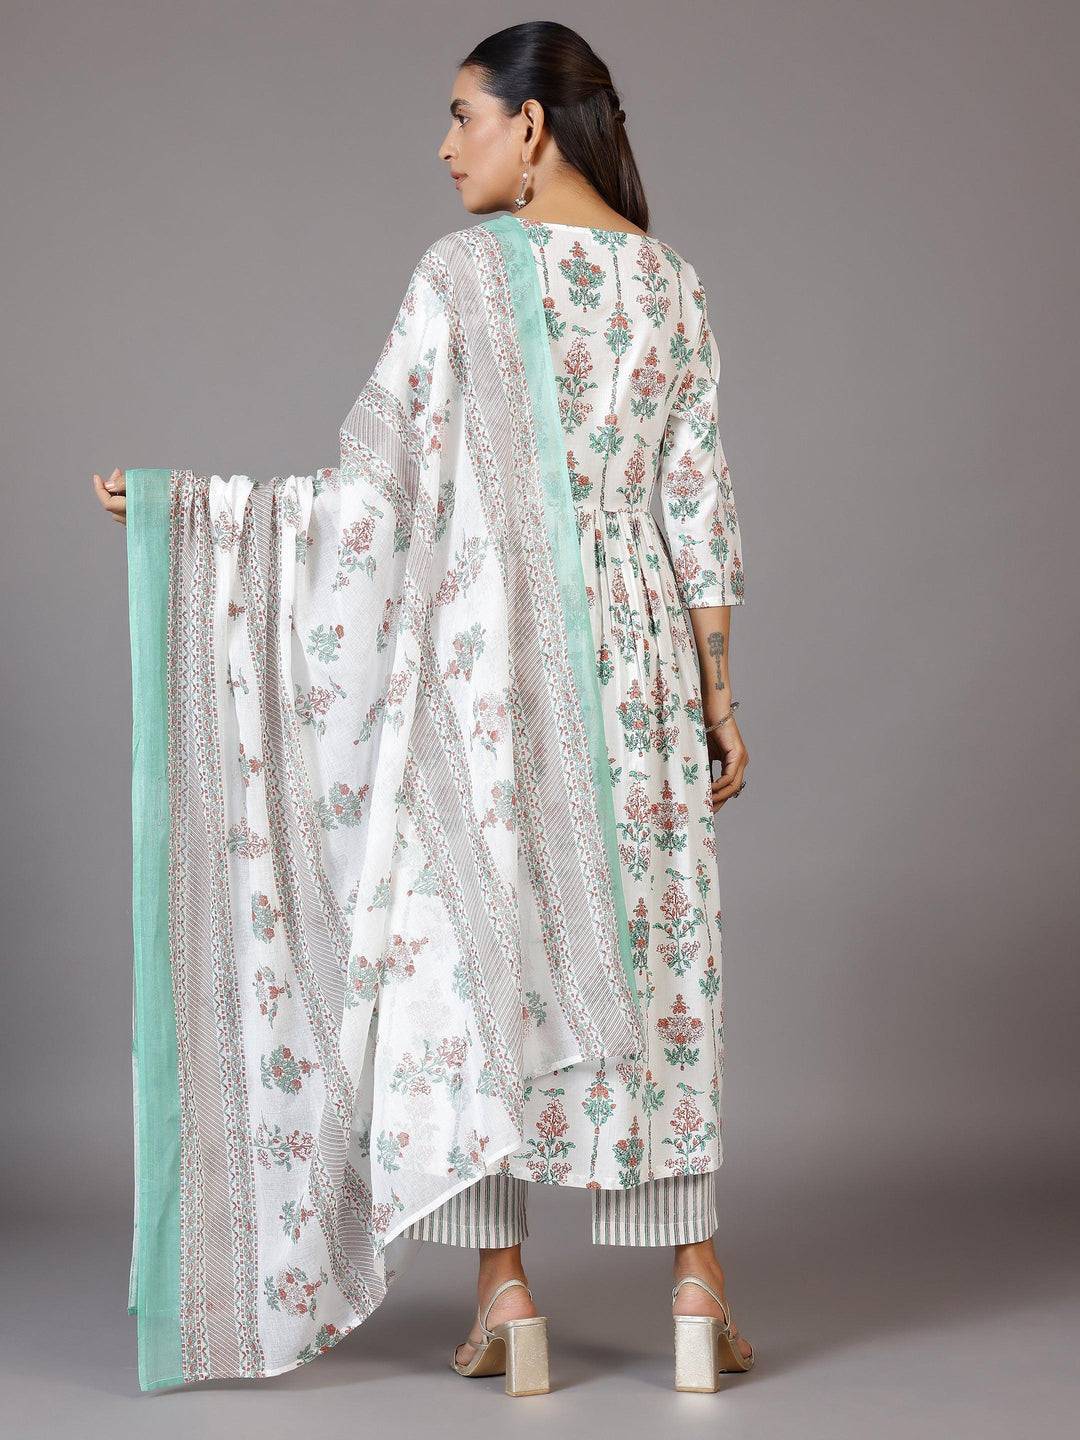 Off White Printed Cotton Anarkali Suit With Dupatta - Libas